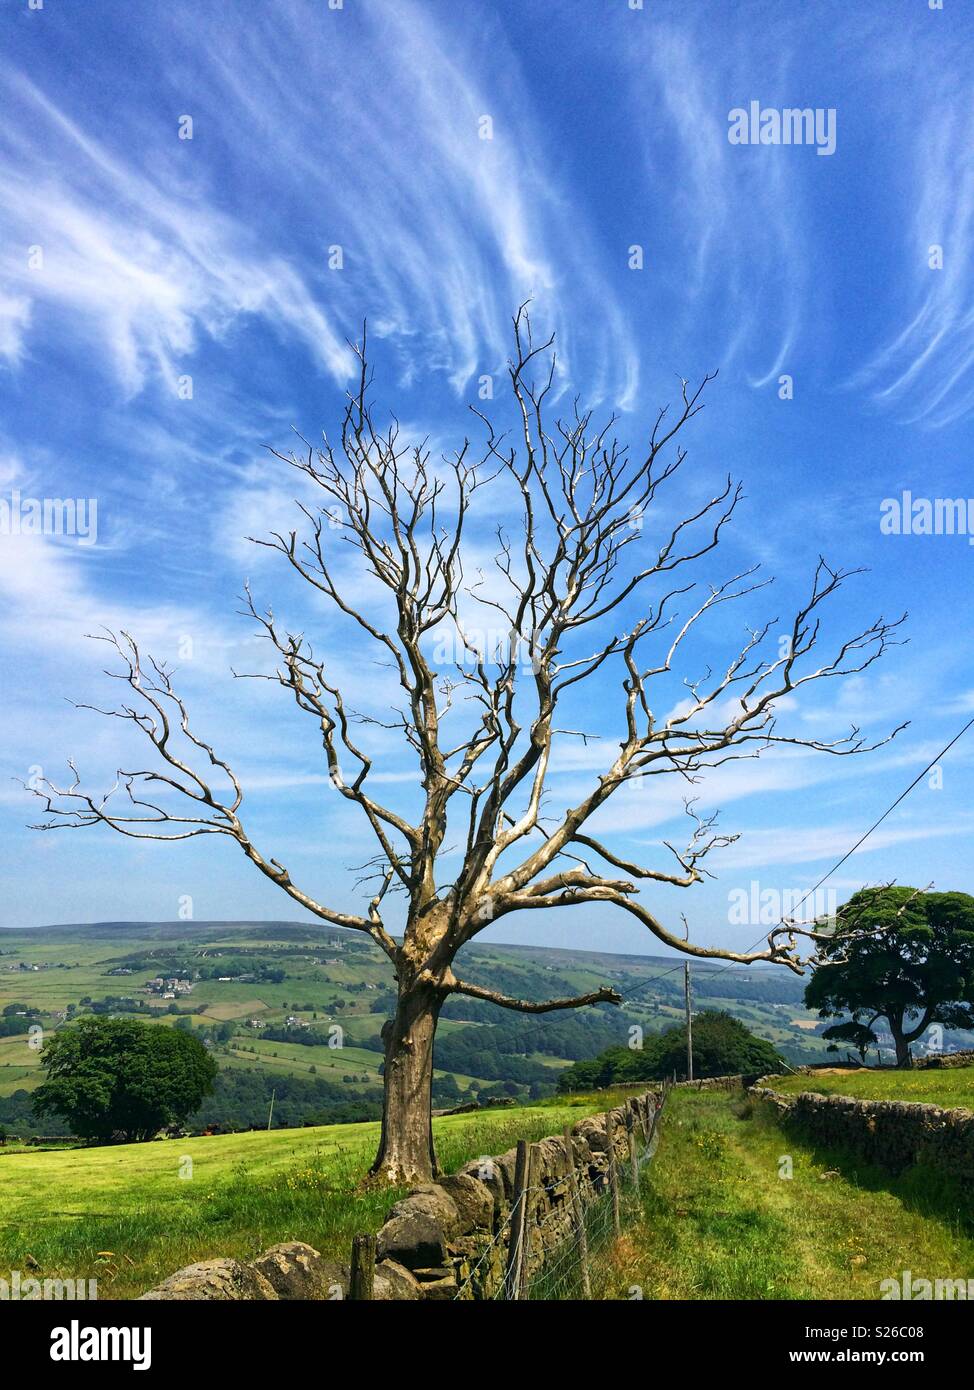 Silver dead tree against electric blue sky with wispy white clouds Stock Photo